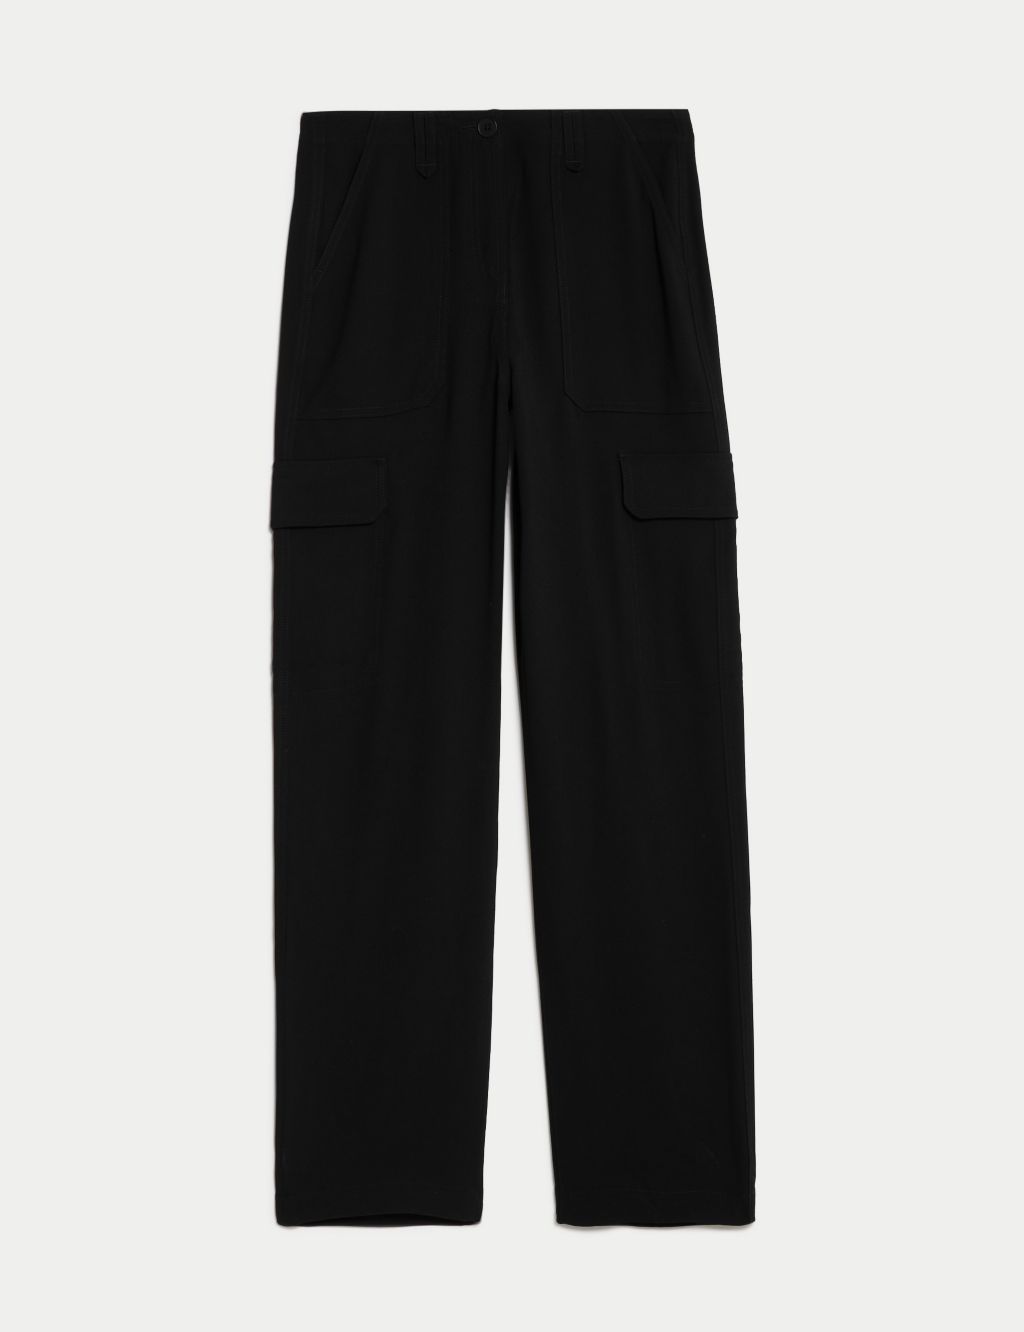 Crepe Cargo Relaxed Trousers image 2